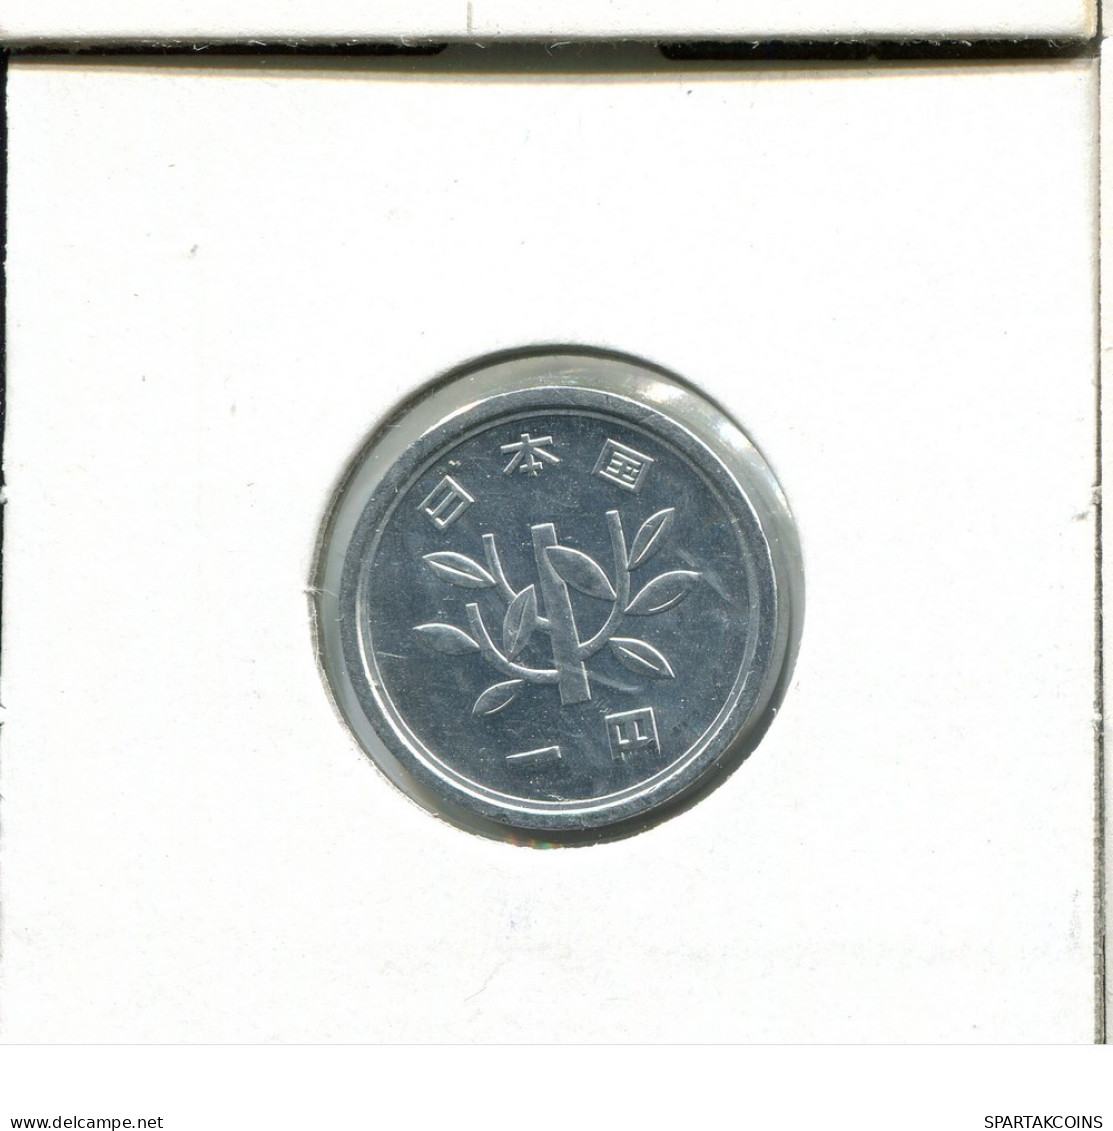 1 YEN 1992 JAPAN Coin #AT845.U.A - Giappone